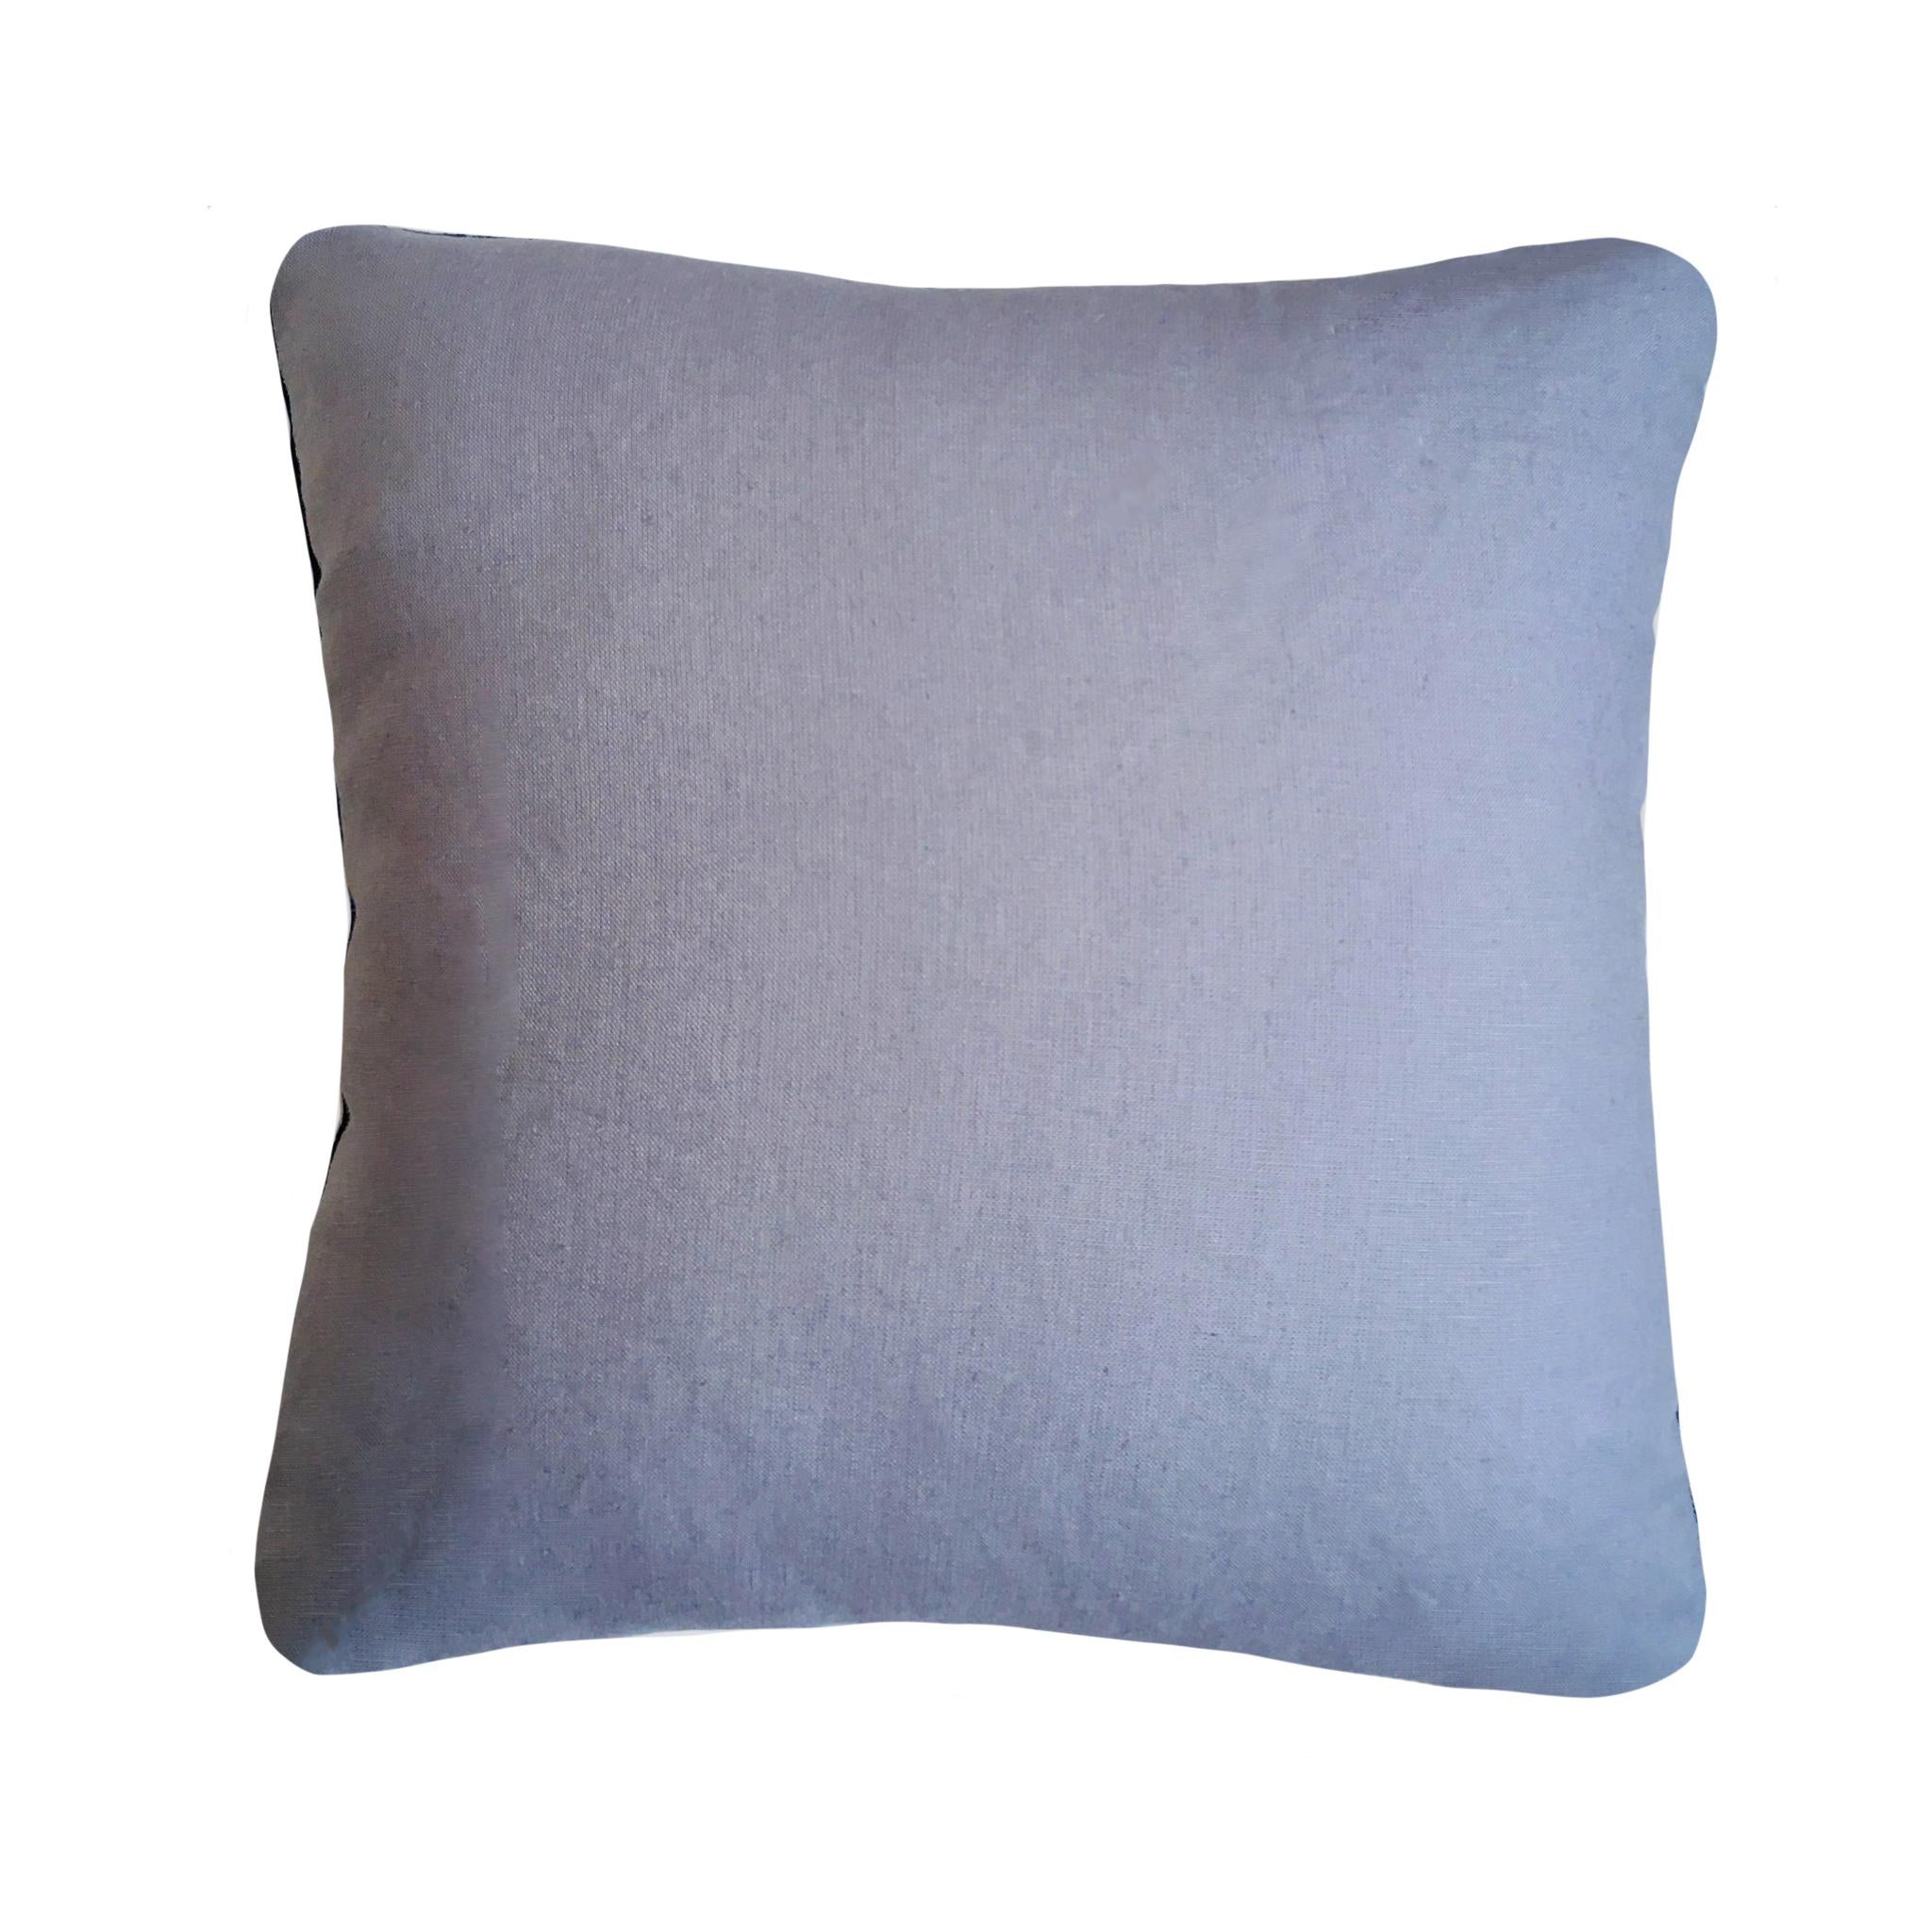 Only one piece made in this design, available only through 1st Dibs!

Rose velvet cushion dyed with indigo in Inkblot pattern with grey linen backing, invisible zip closure at bottom.

Hand-dyed and sewn in New York City.

Pillow measures 18 x 18